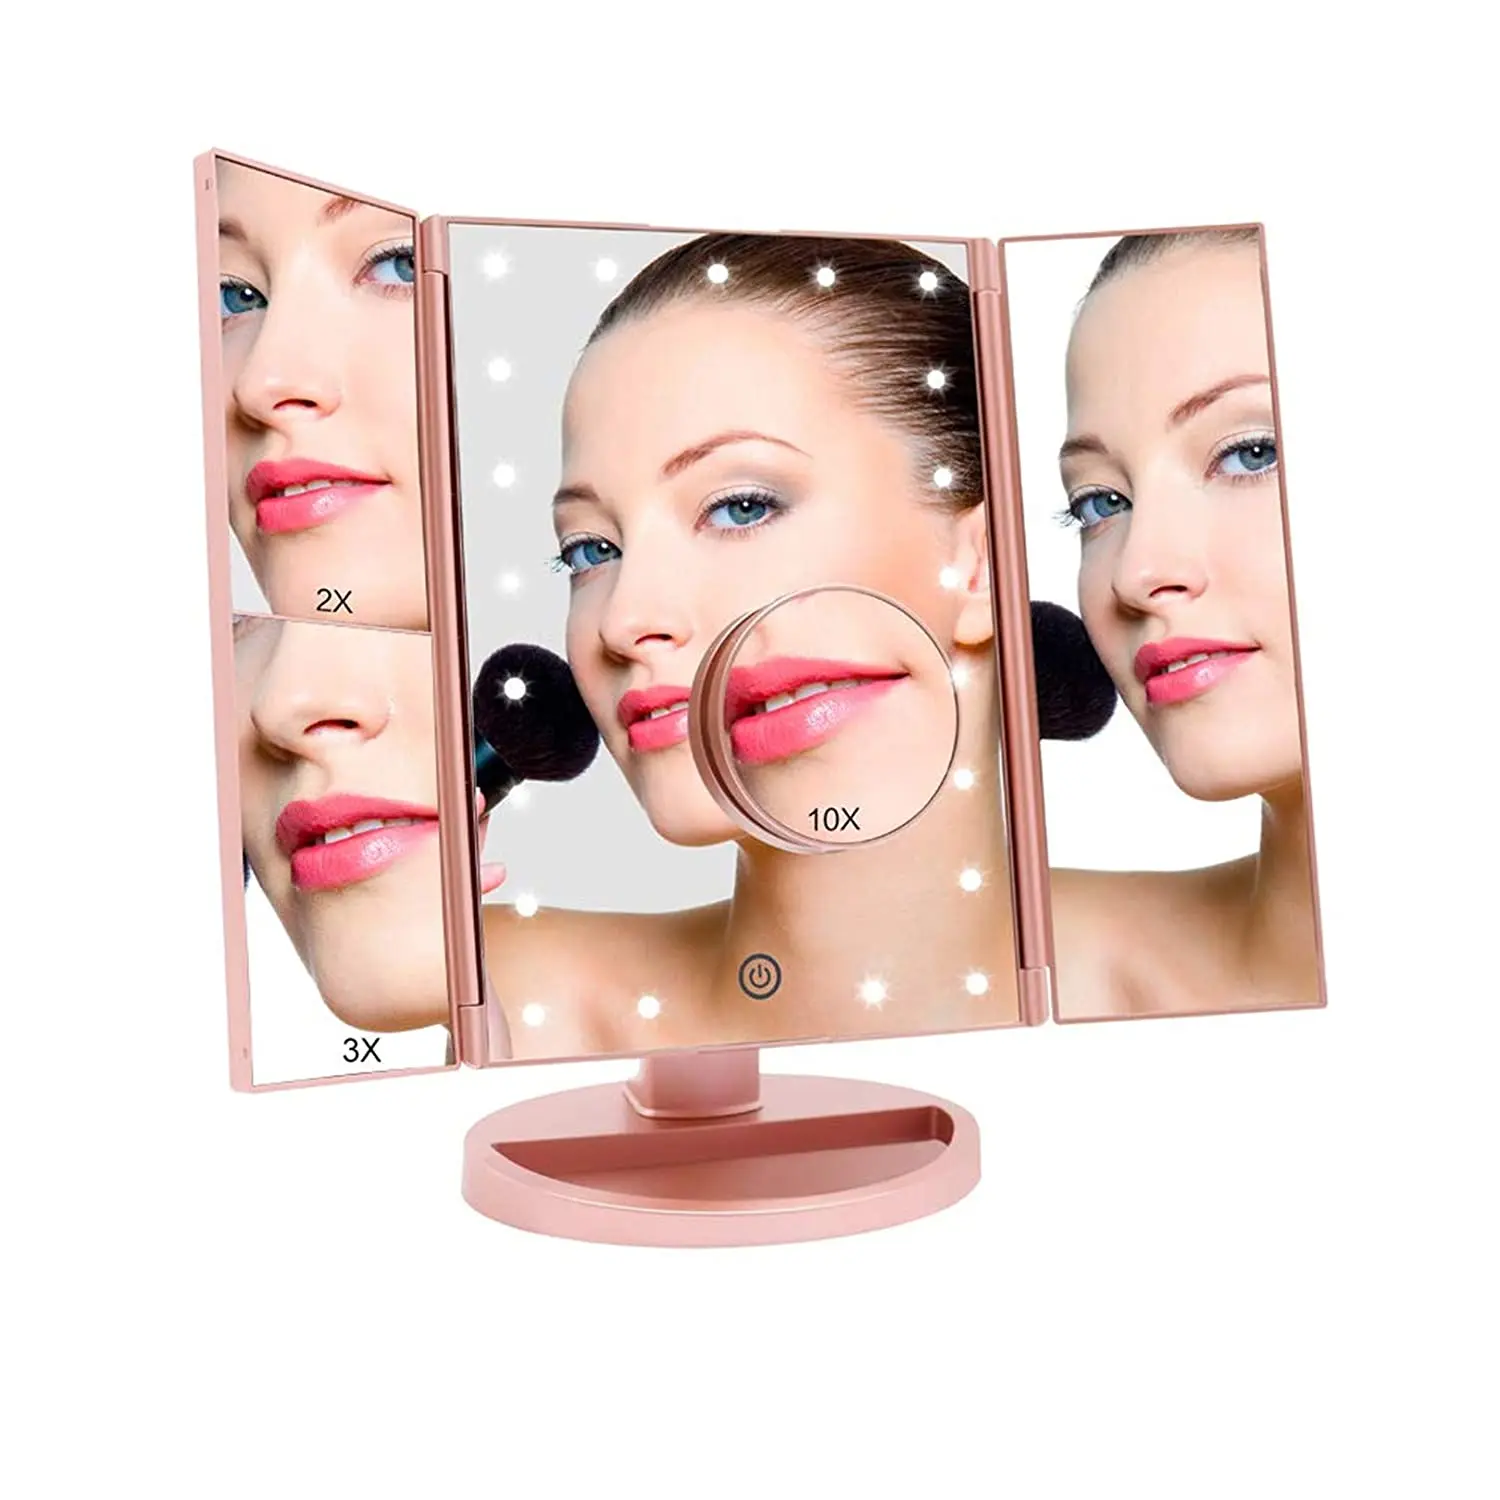 Amazon Top Seller 2019 Vanity Led Lighted Travel Makeup Mirror Desktop Trifold Magnifier Make Up Mirror With Lights